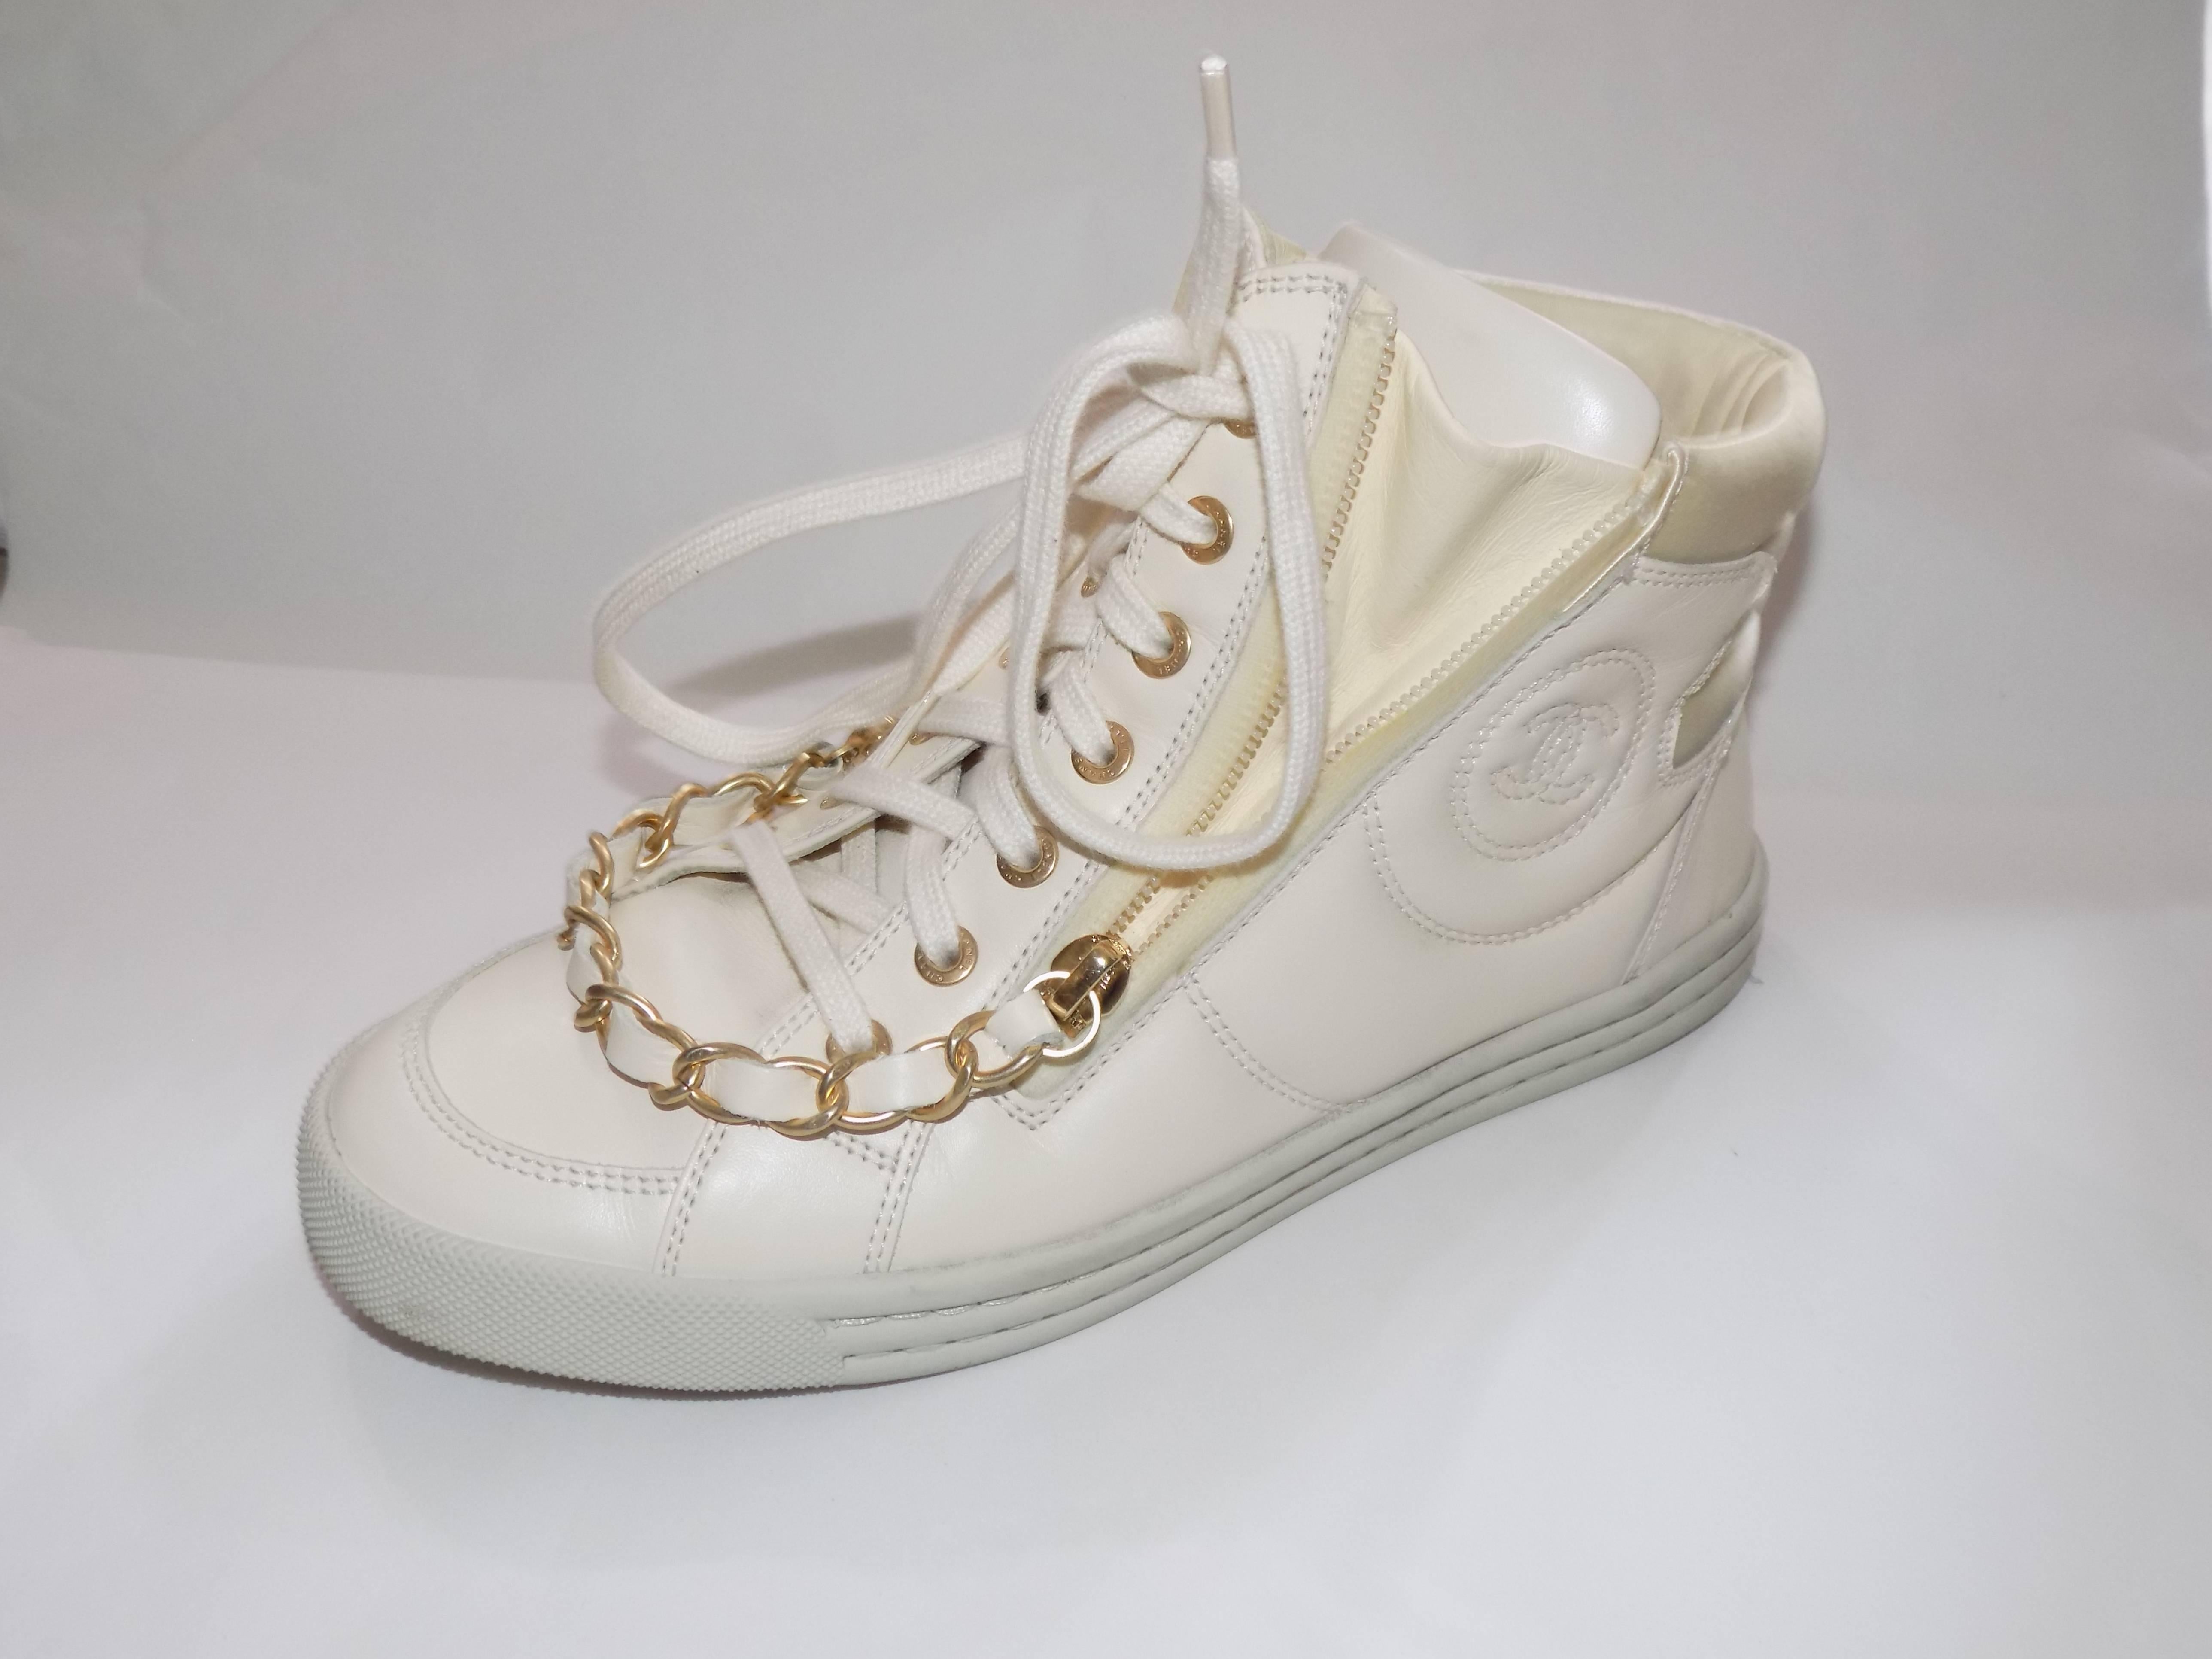 fabulous worn once Chanel winter white  sneakers with two side zippers ang gold pull chain.  CC logo  Size 37.5